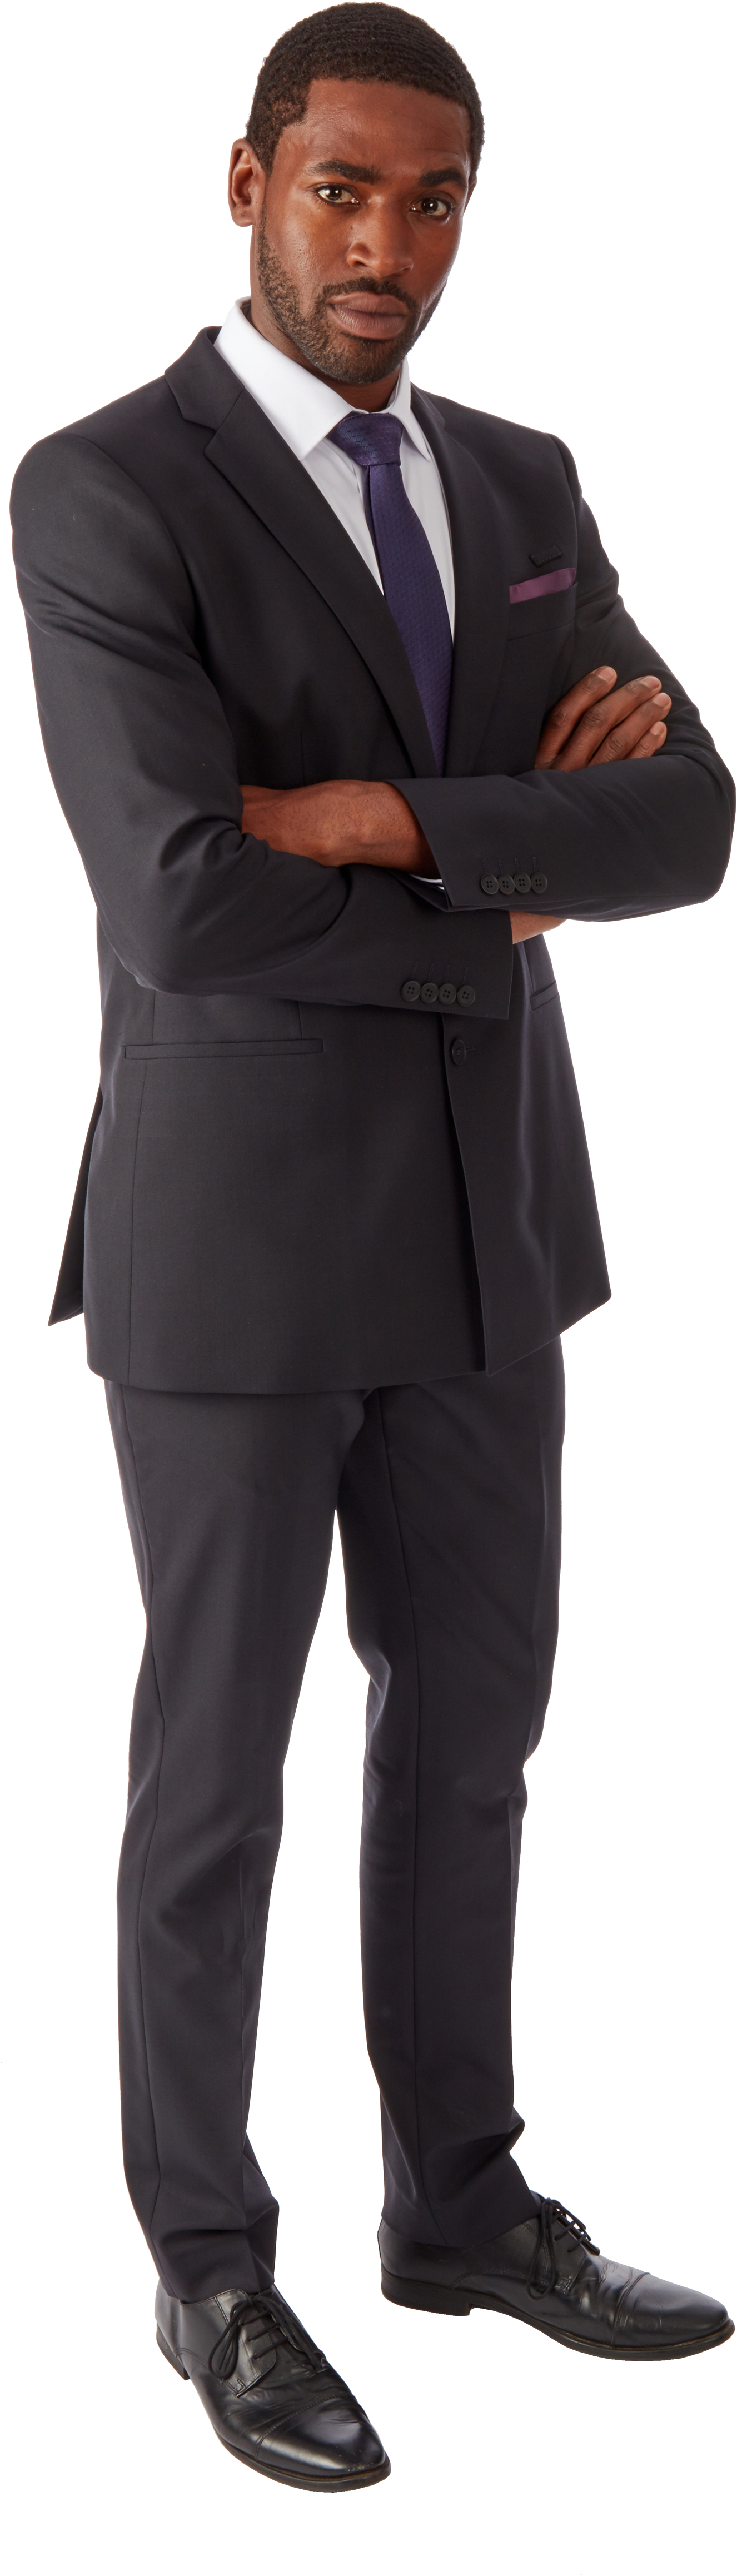 Professional Man In Black Suit PNG image